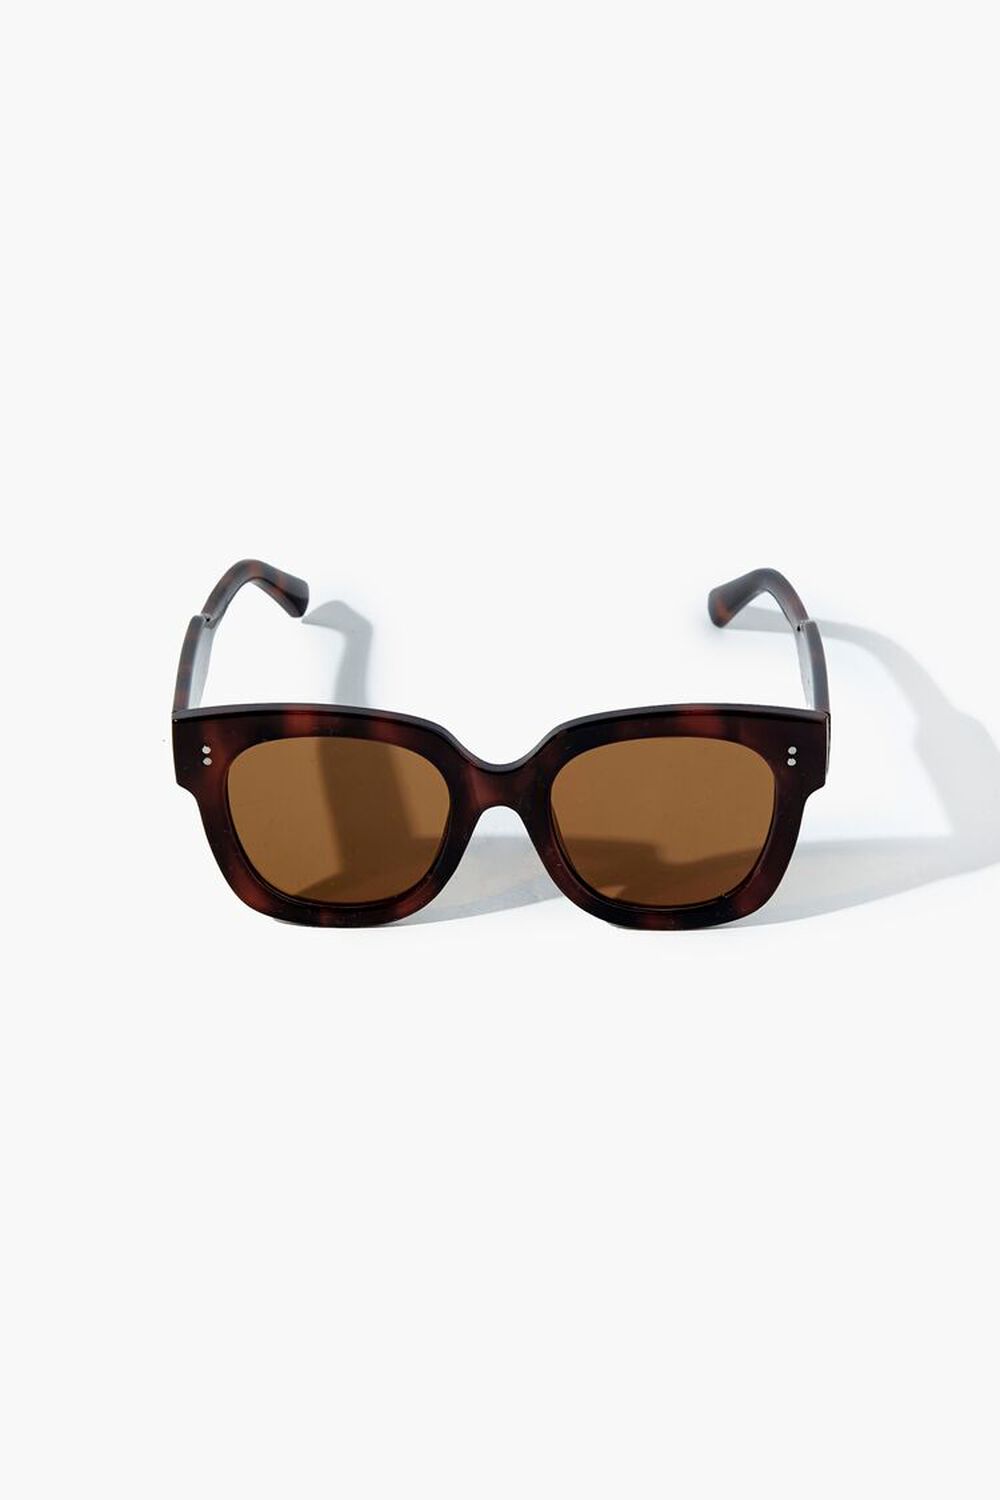 BROWN/BROWN Square Frame Sunglasses, image 1